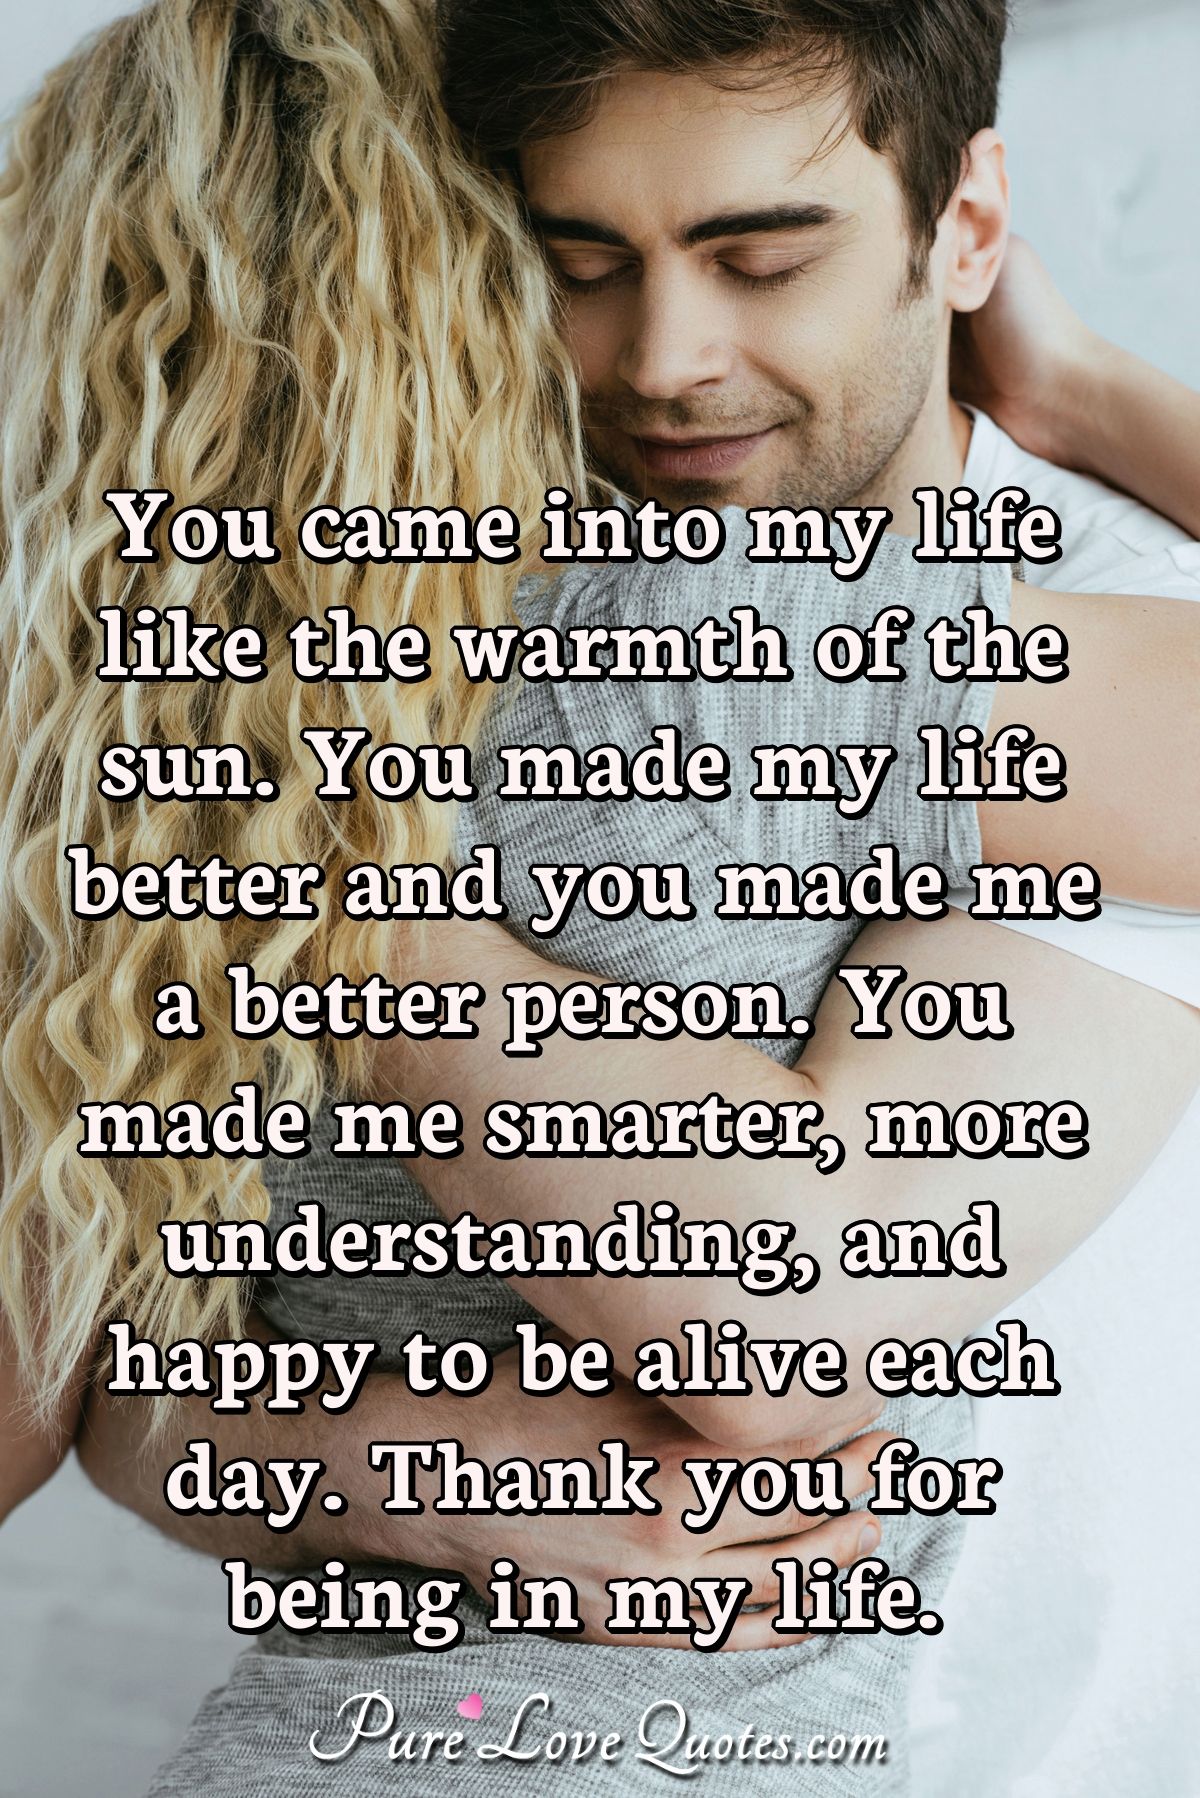 Pure Love Quotes You Came Into My Life Like The Warmth Of The Sun You Made My Life Better And You Made Me A Better Person You Made Me Smarter